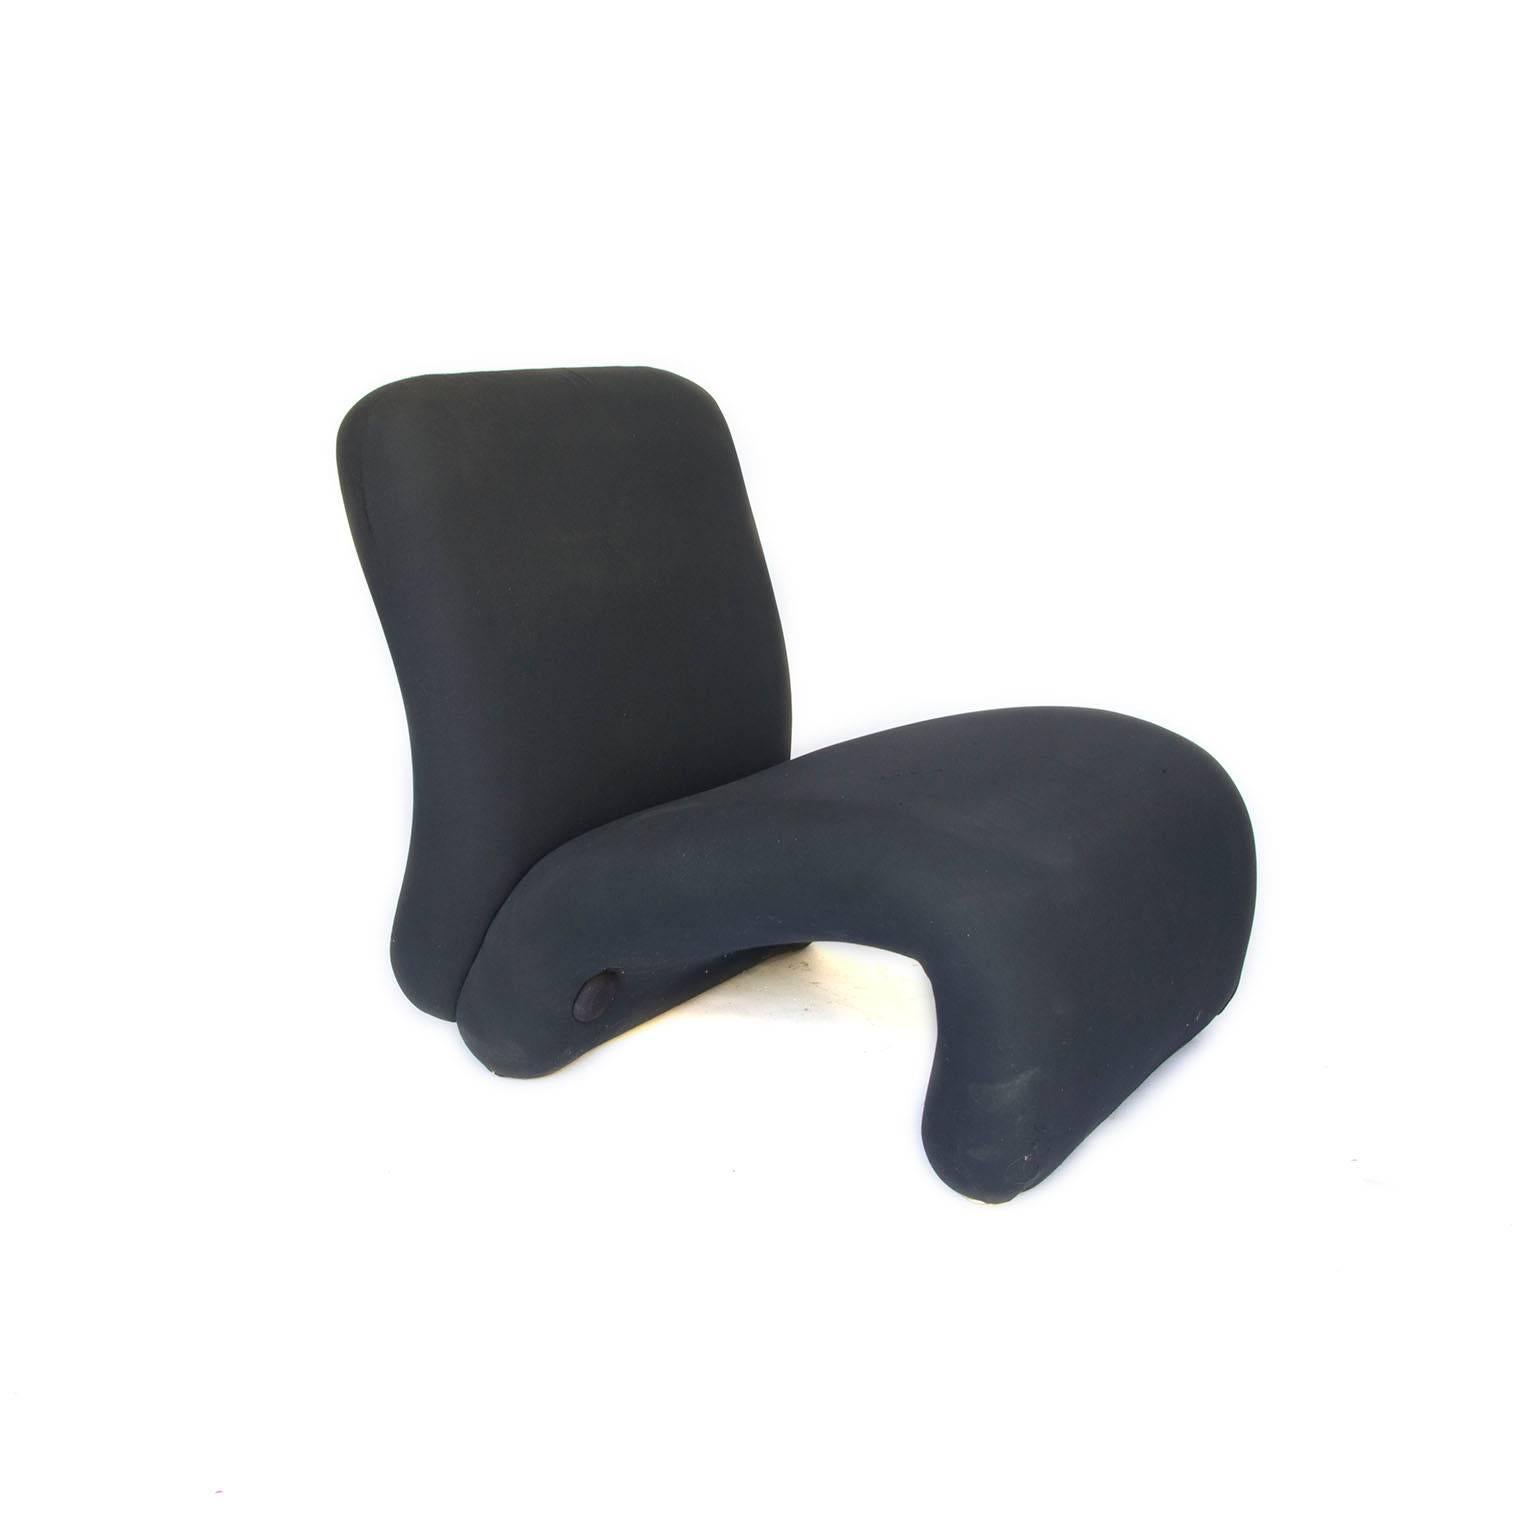 Set of lounge chairs in original black stretch fabric, very comfortable because of slightly flexible base.

On request reupholstery is possible in any kind of leather or fabric of your choice. Please ask for more information and the many